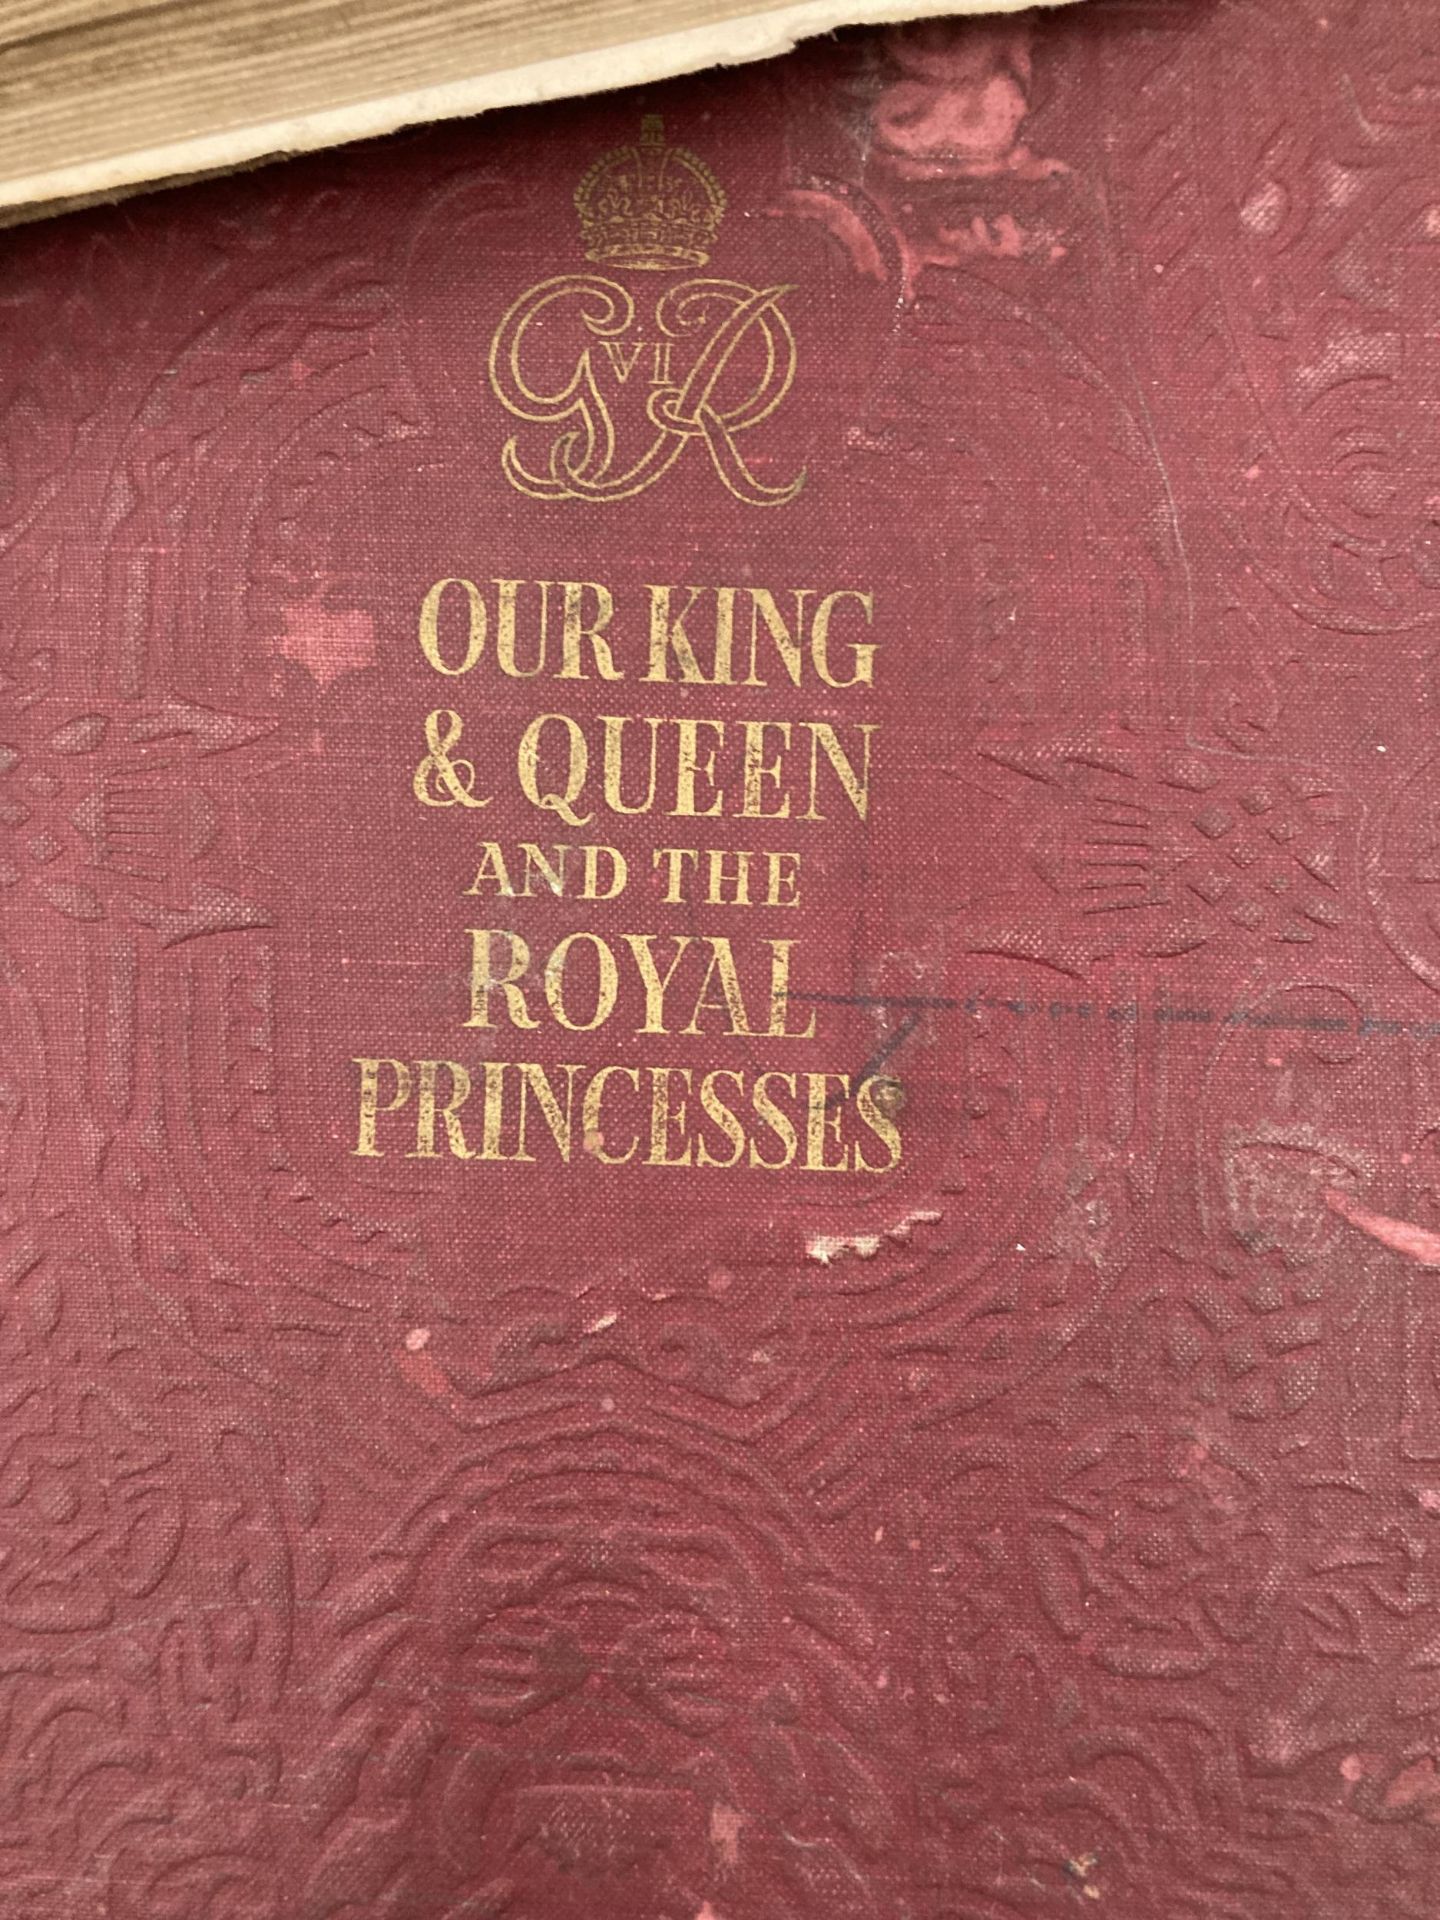 A COLLECTION OF ROYAL MEMORIBILIA BOOKS TO INCLUDE THE CORONATION OF KING GEORGE VI, ETC - 5 IN - Image 6 of 8